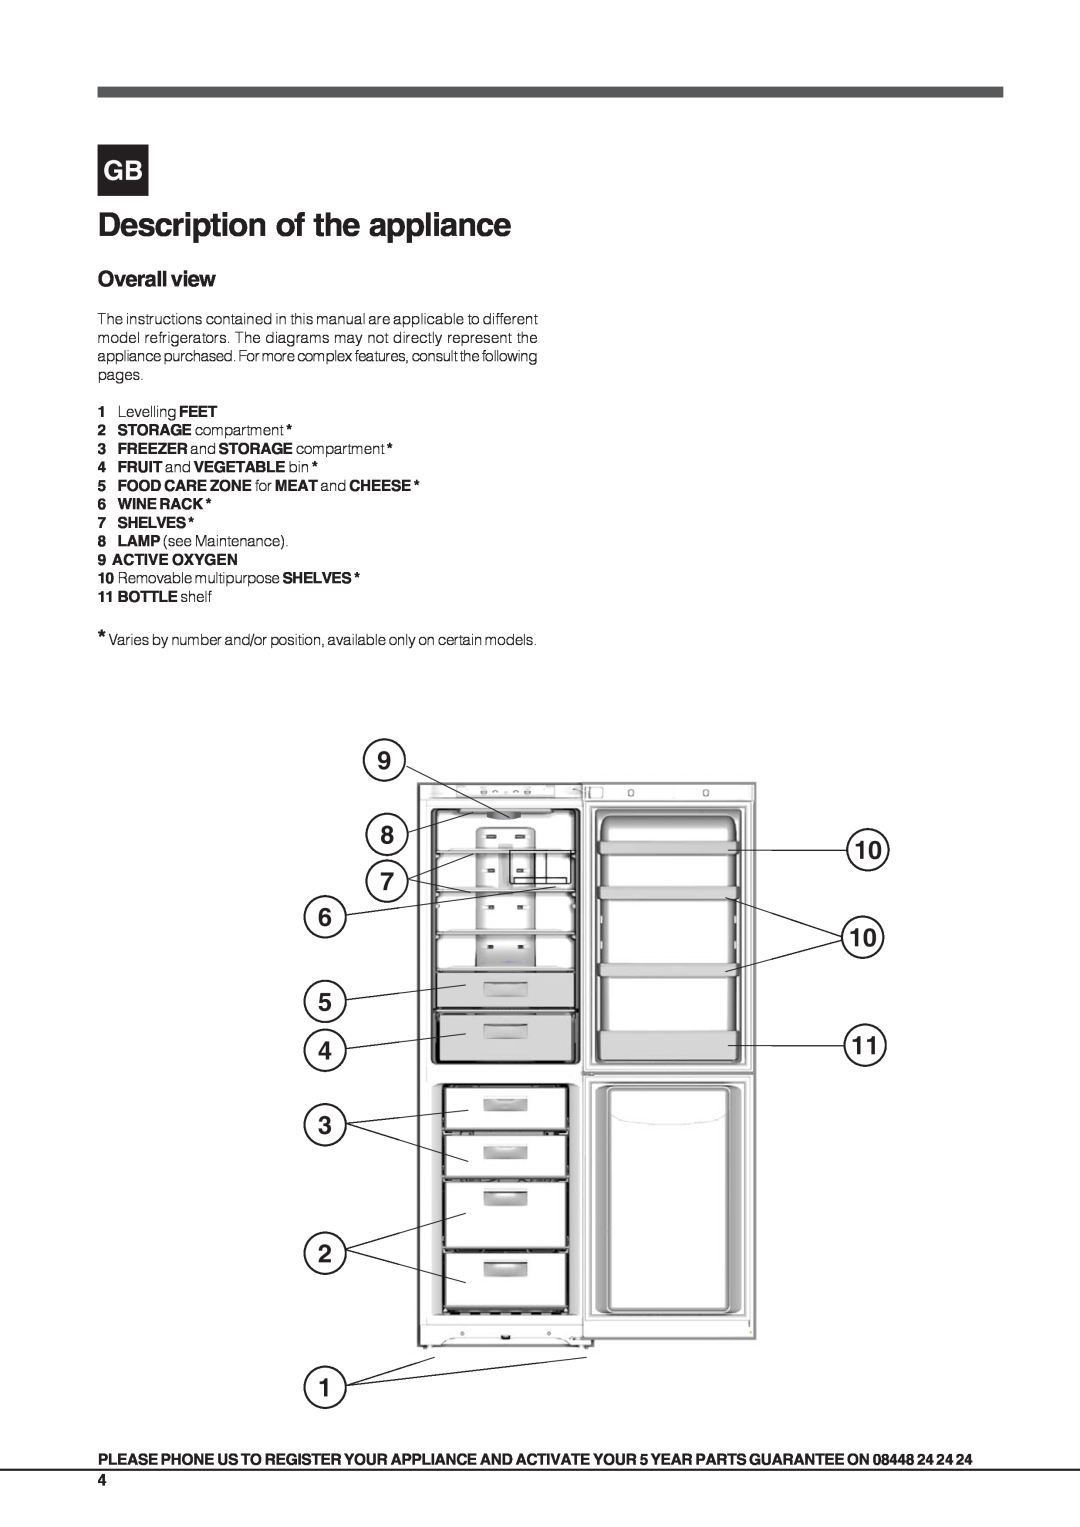 Hotpoint JFUFLxxxxx O3 Description of the appliance, FREEZER and STORAGE compartment 4 FRUIT and VEGETABLE bin 